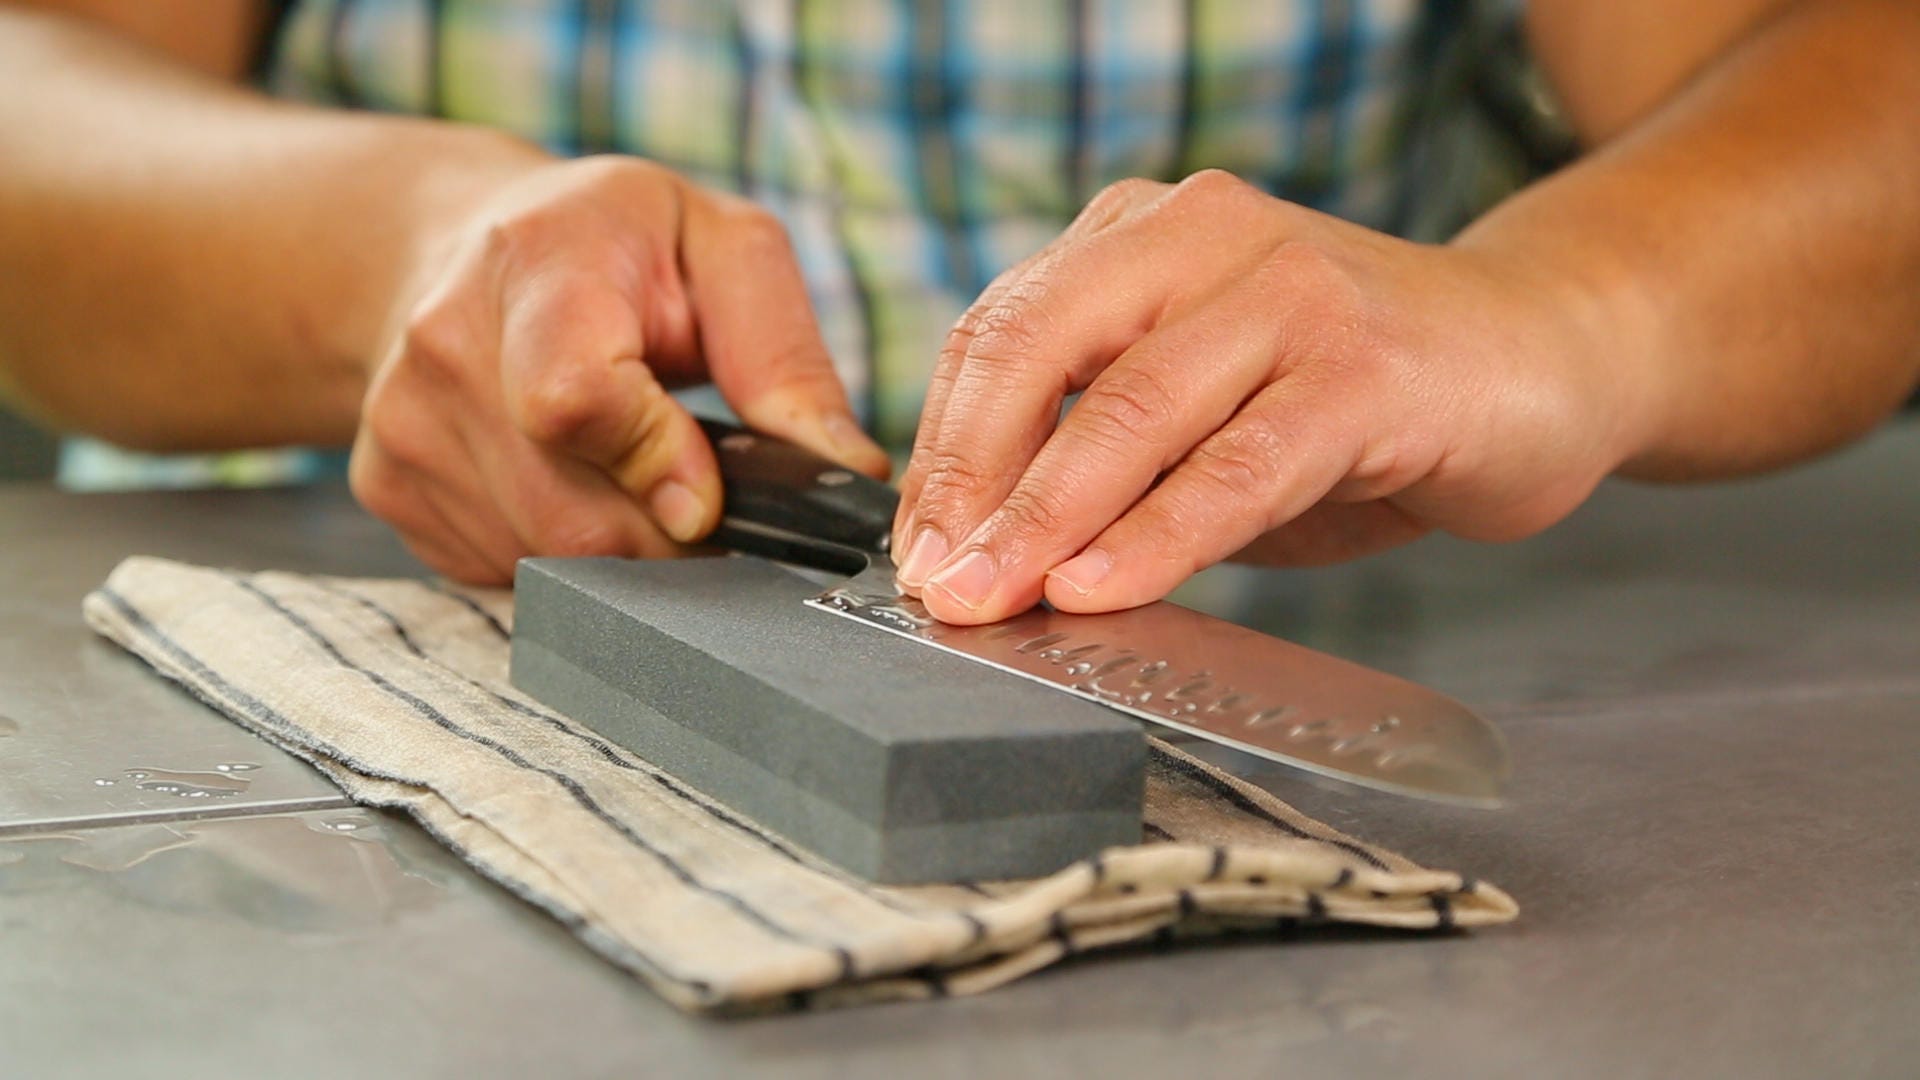 How to keep your kitchen knives razor sharp - CNET